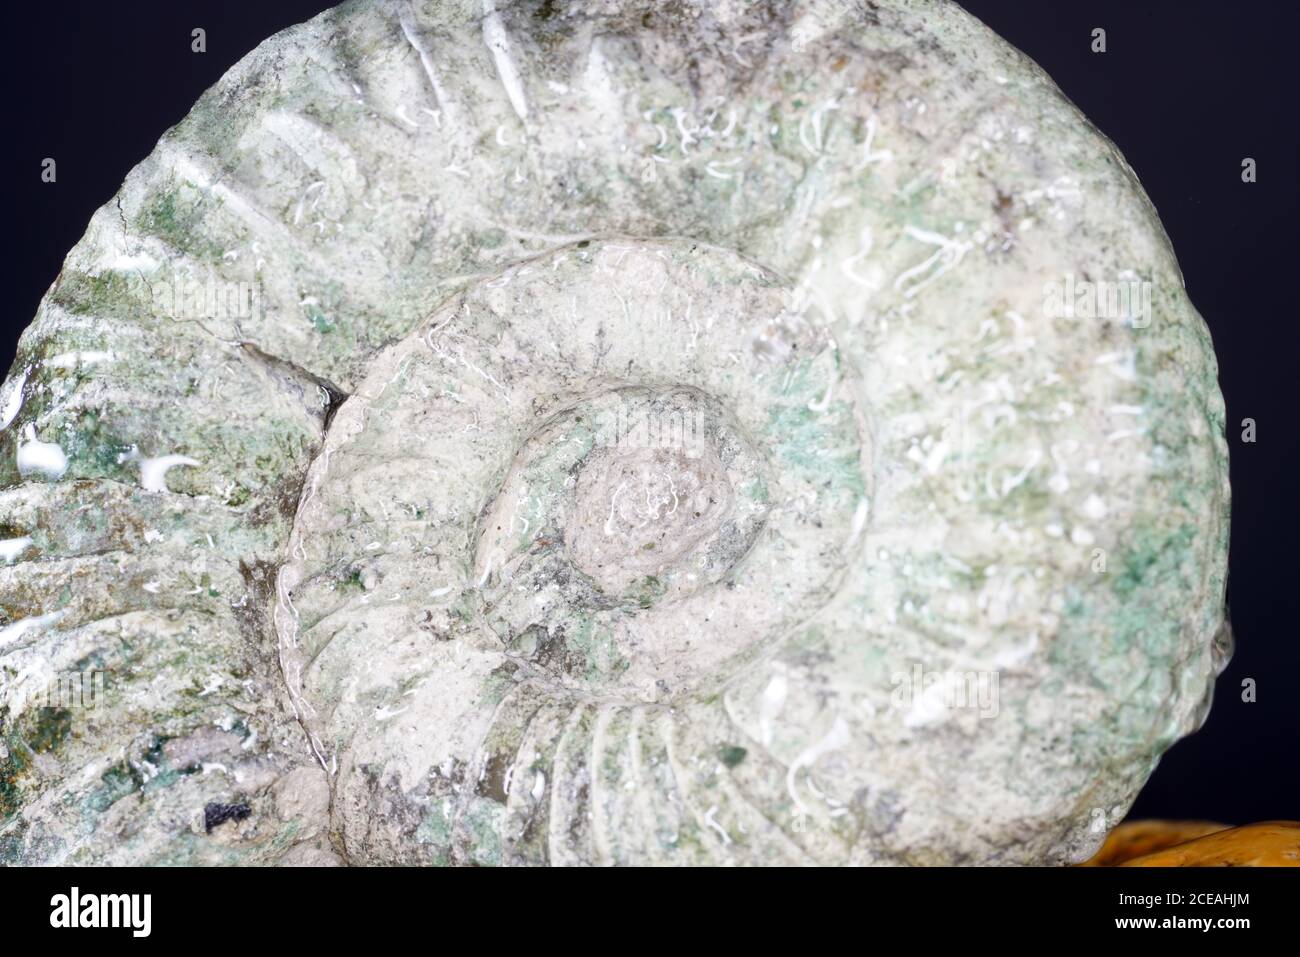 Closeup shot of ammonite fossil on a black background Stock Photo